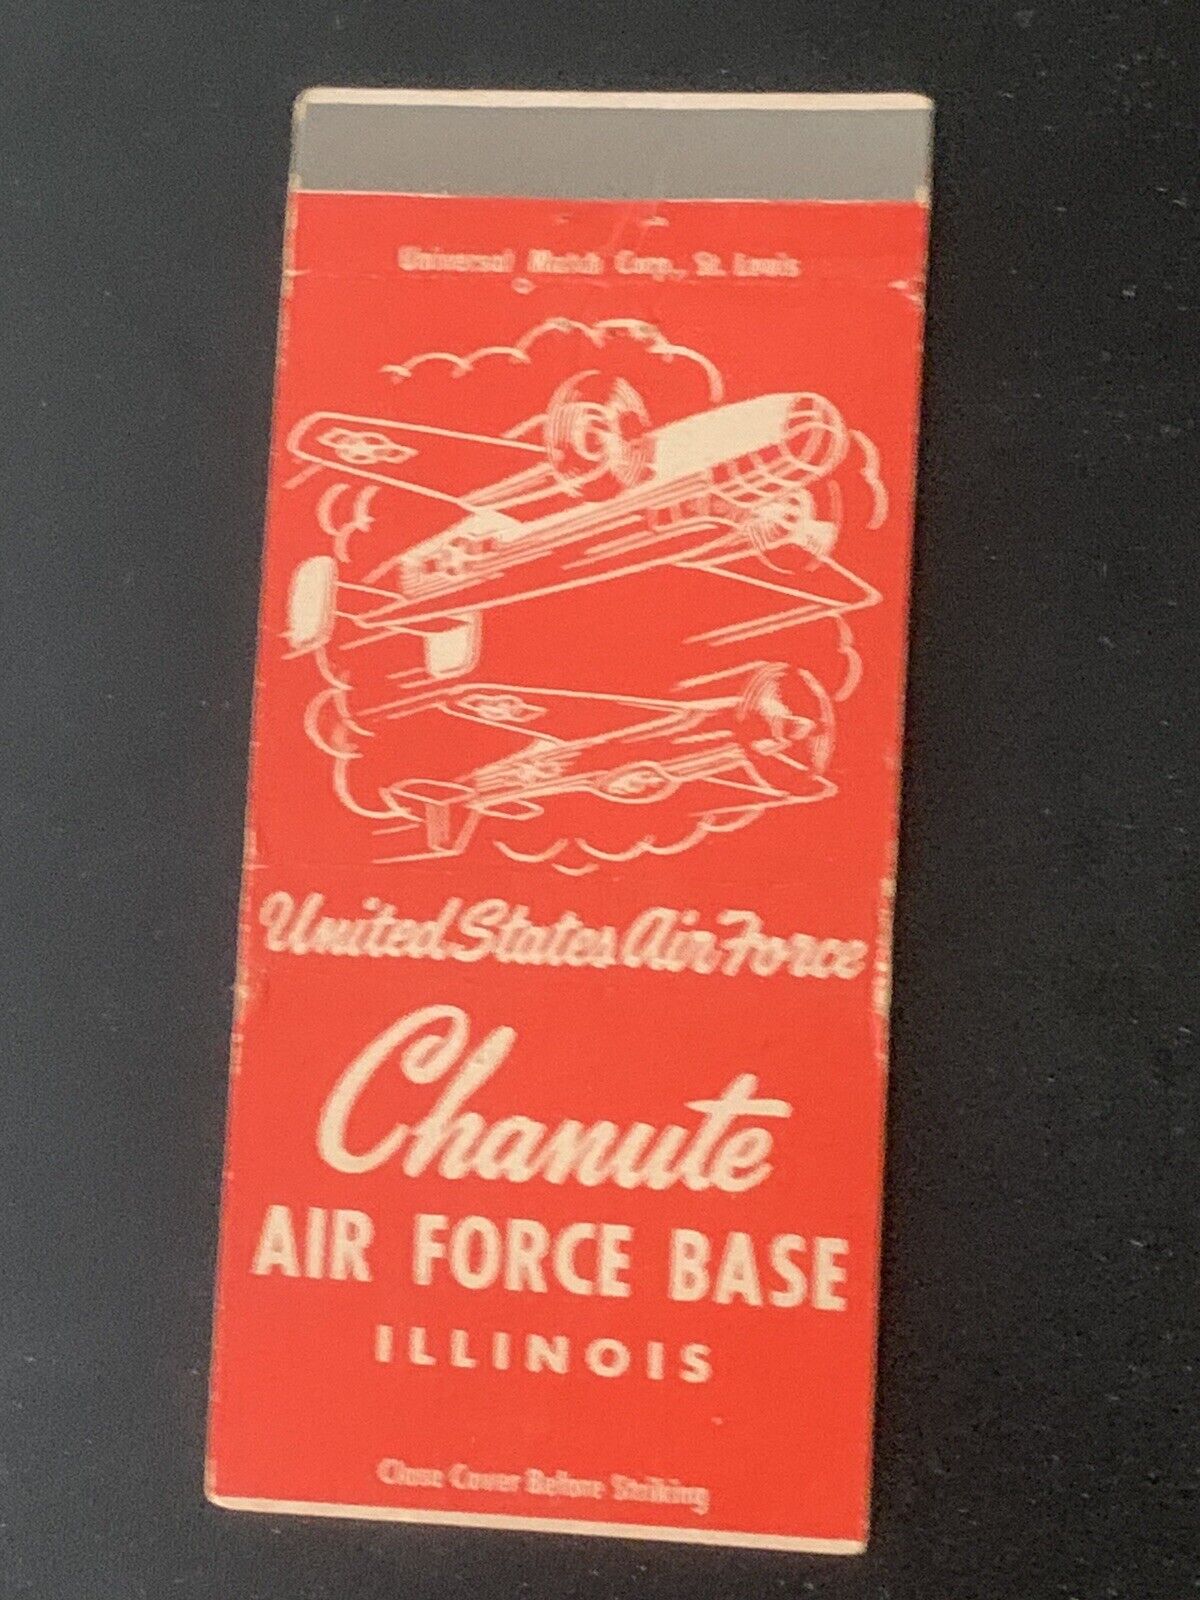 Vintage Military Matchbook “Chanute Air Force Base” Illinois Aviation